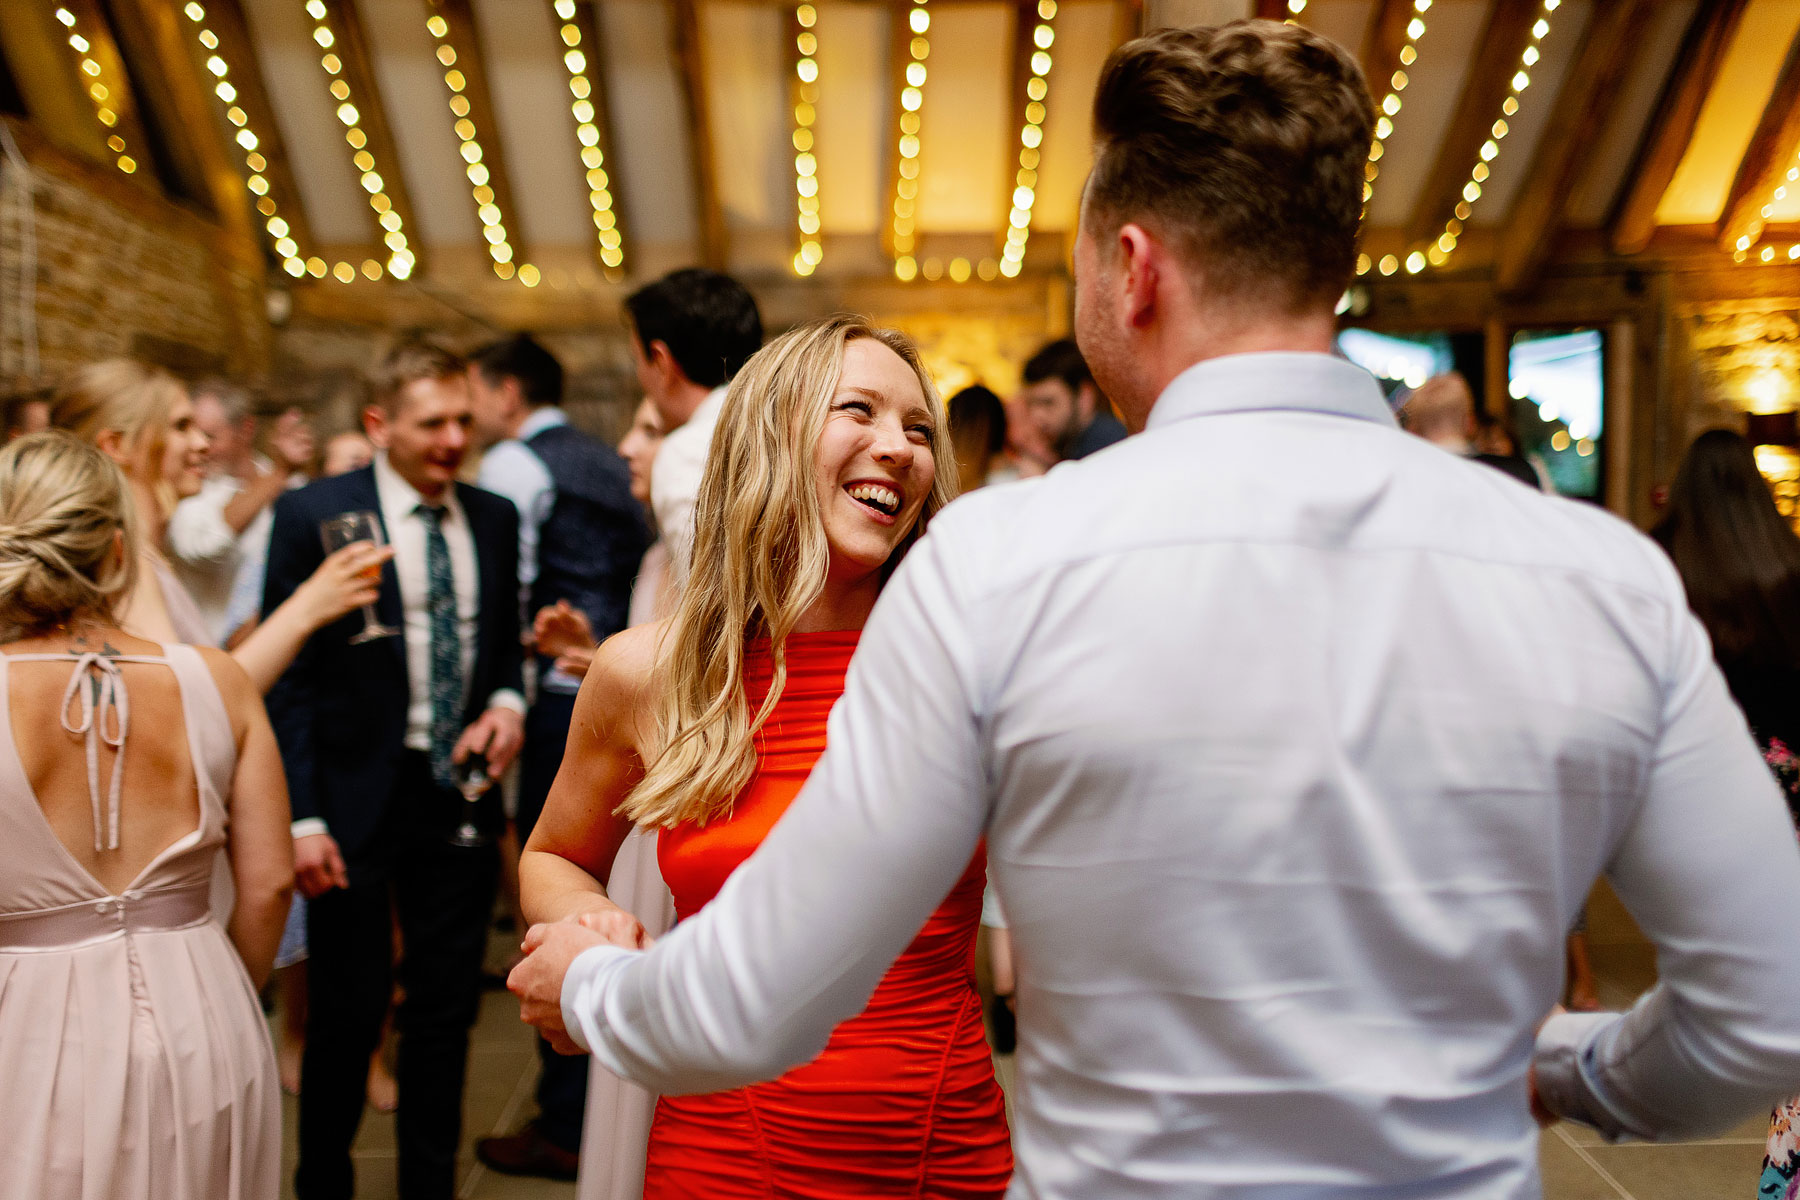 dancing at a wedding in north yorkshire